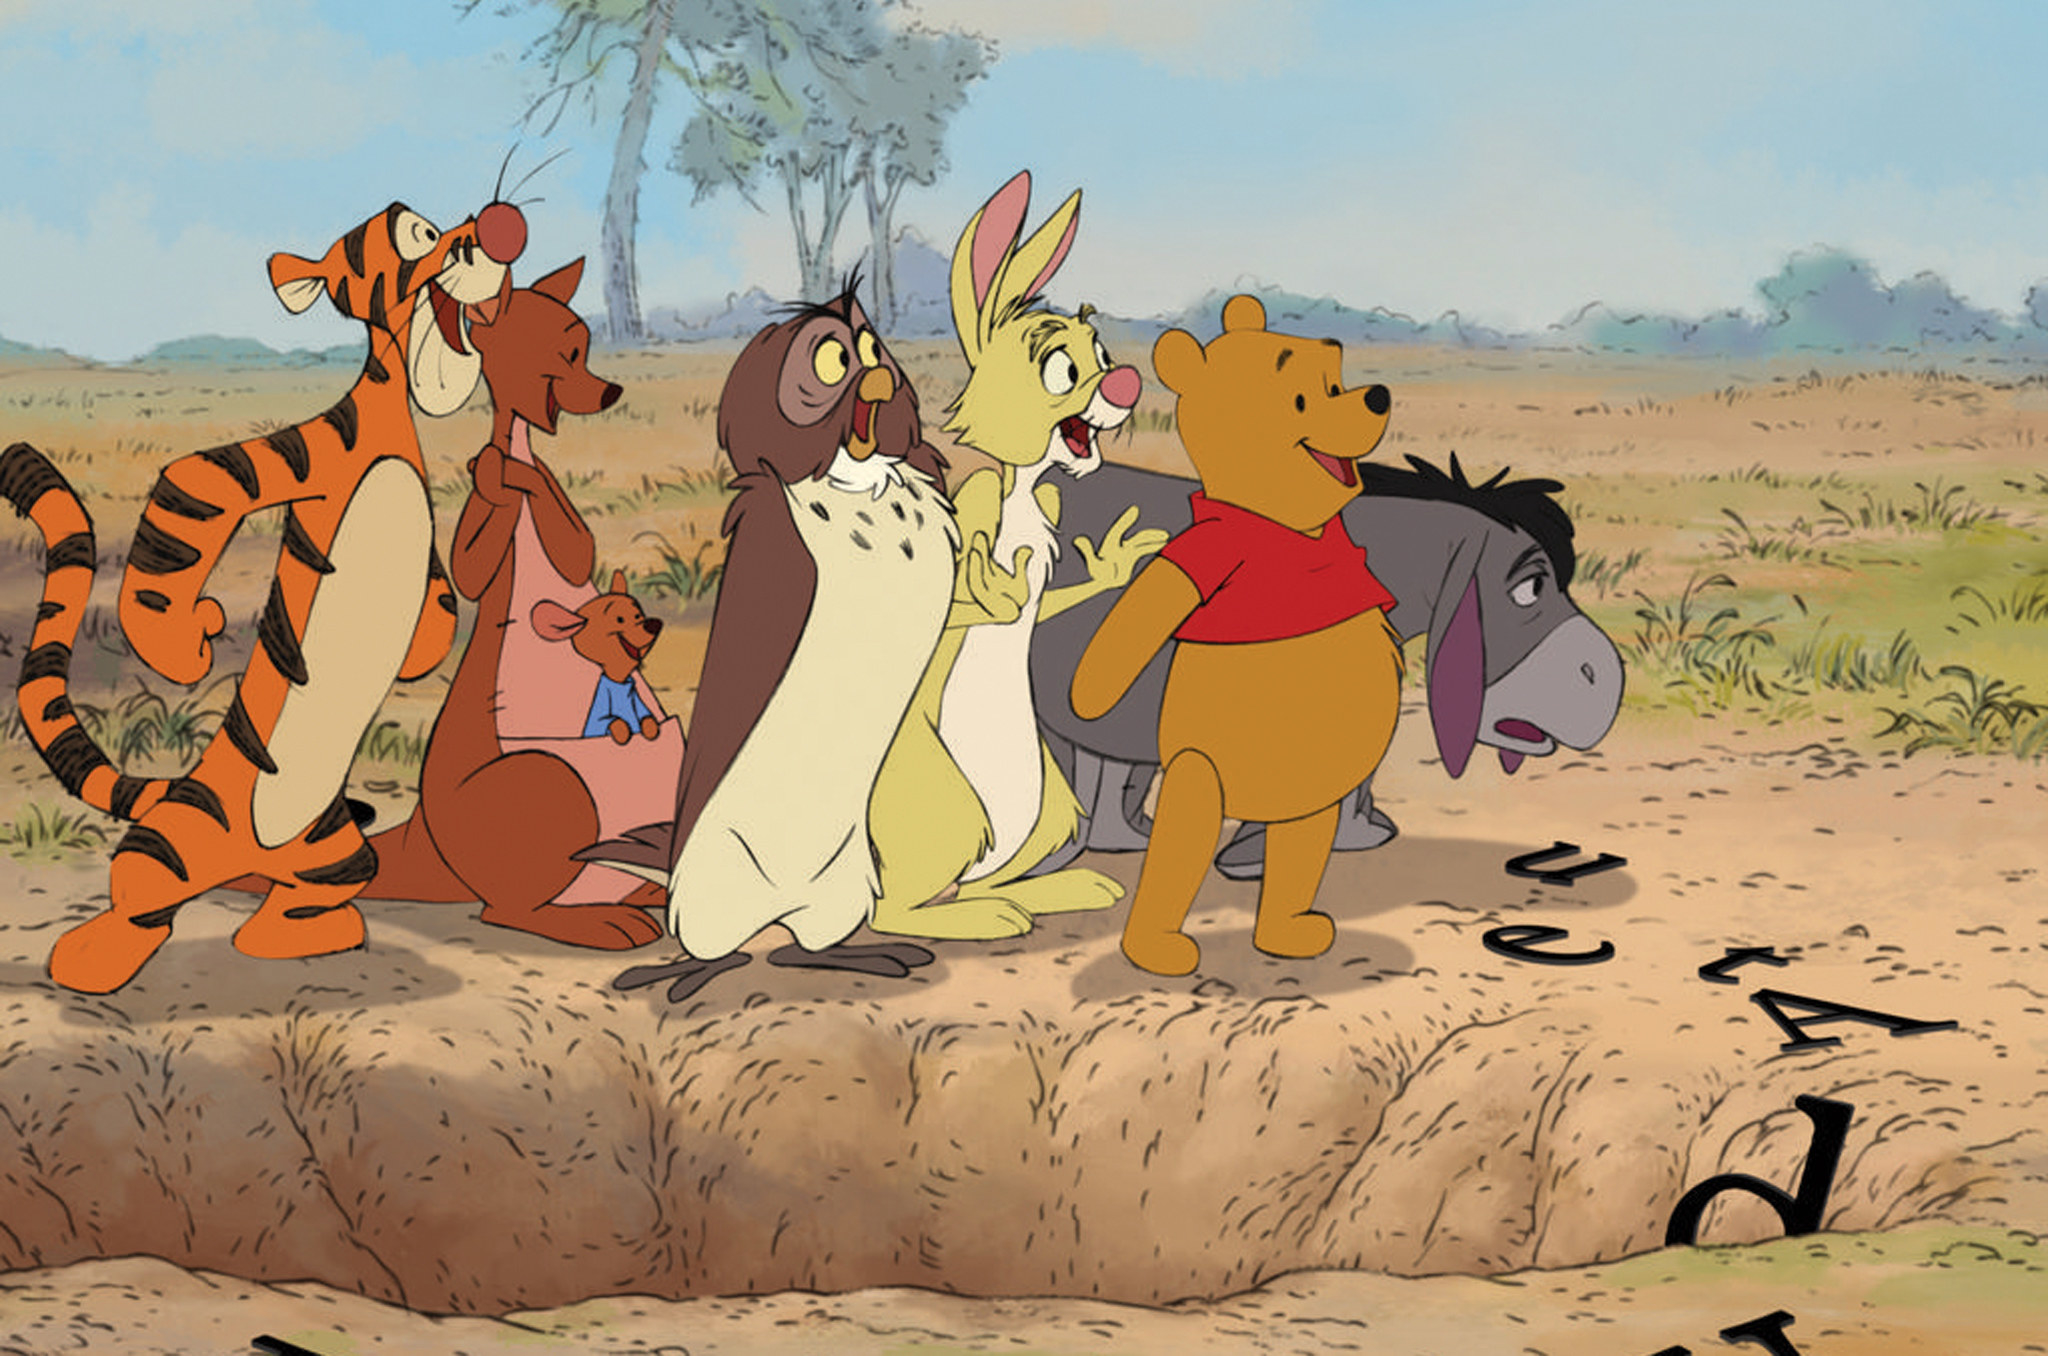 Winnie the Pooh and all his friends in the 2011 Winnie the Pooh movie